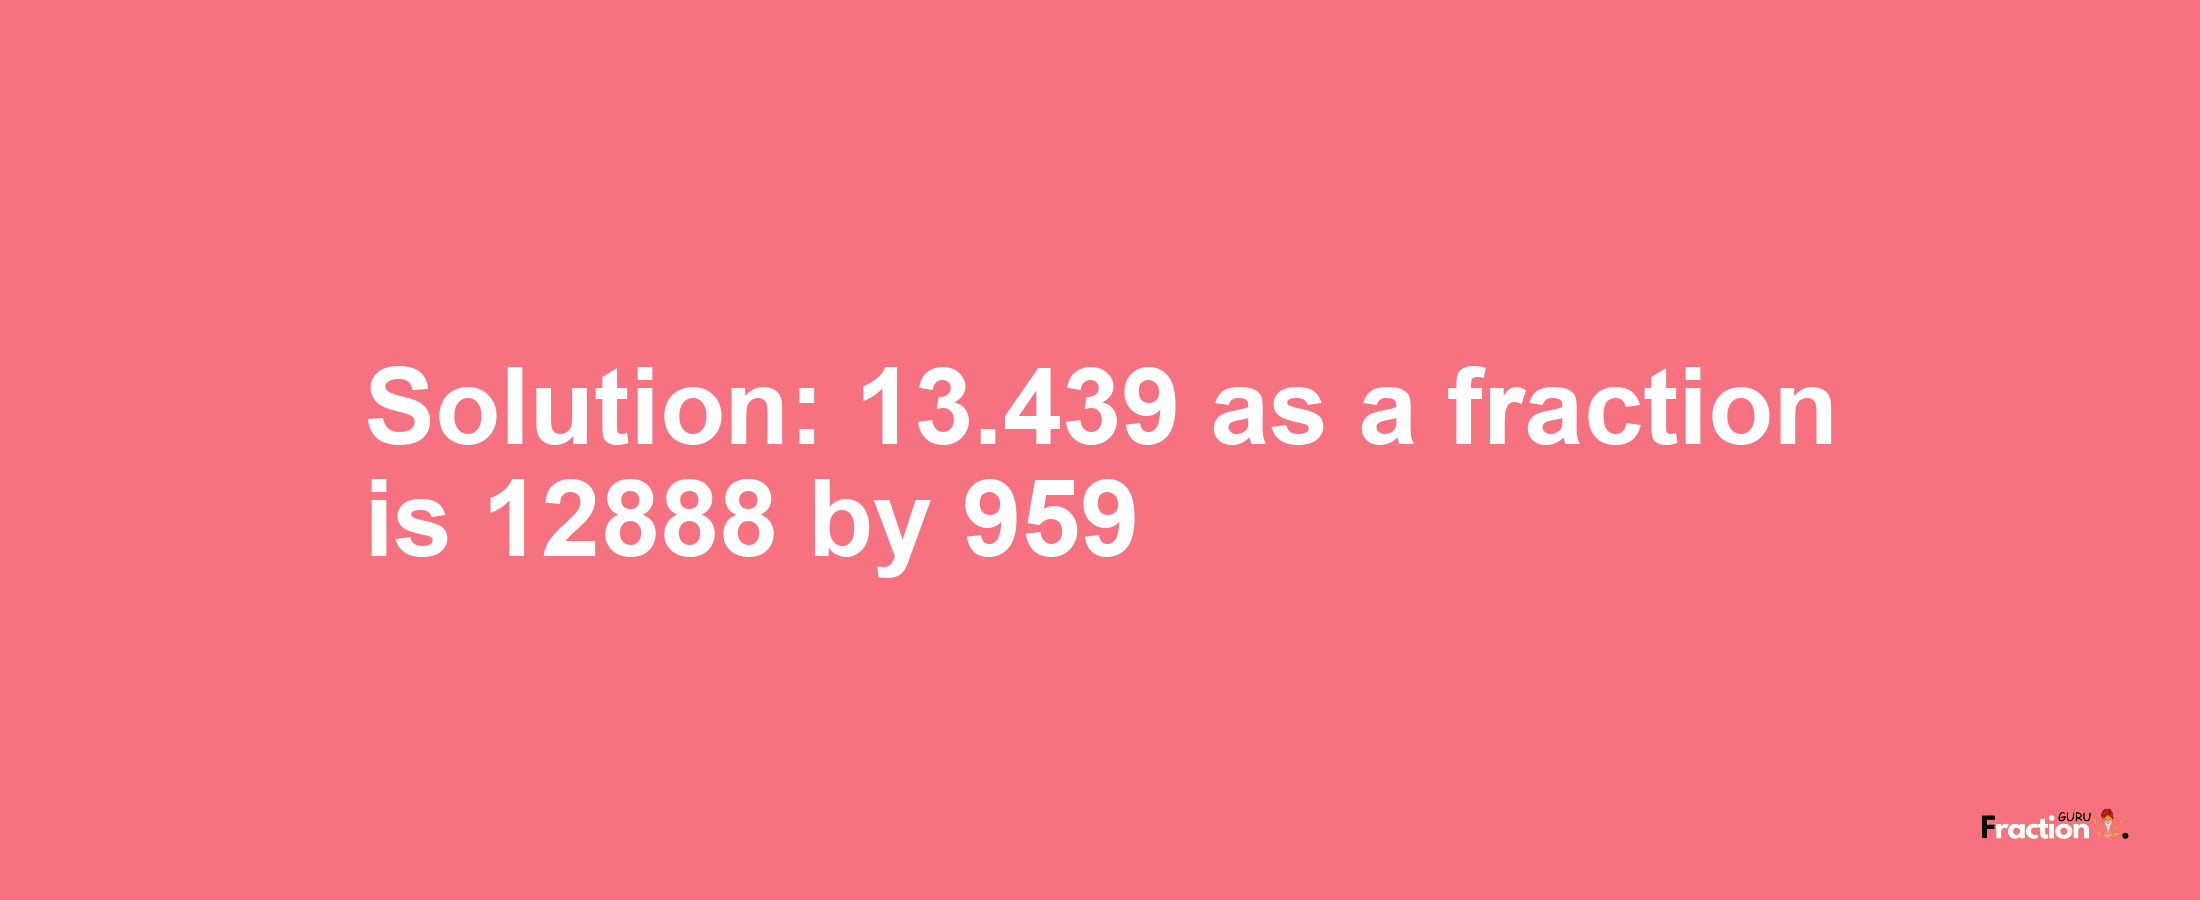 Solution:13.439 as a fraction is 12888/959